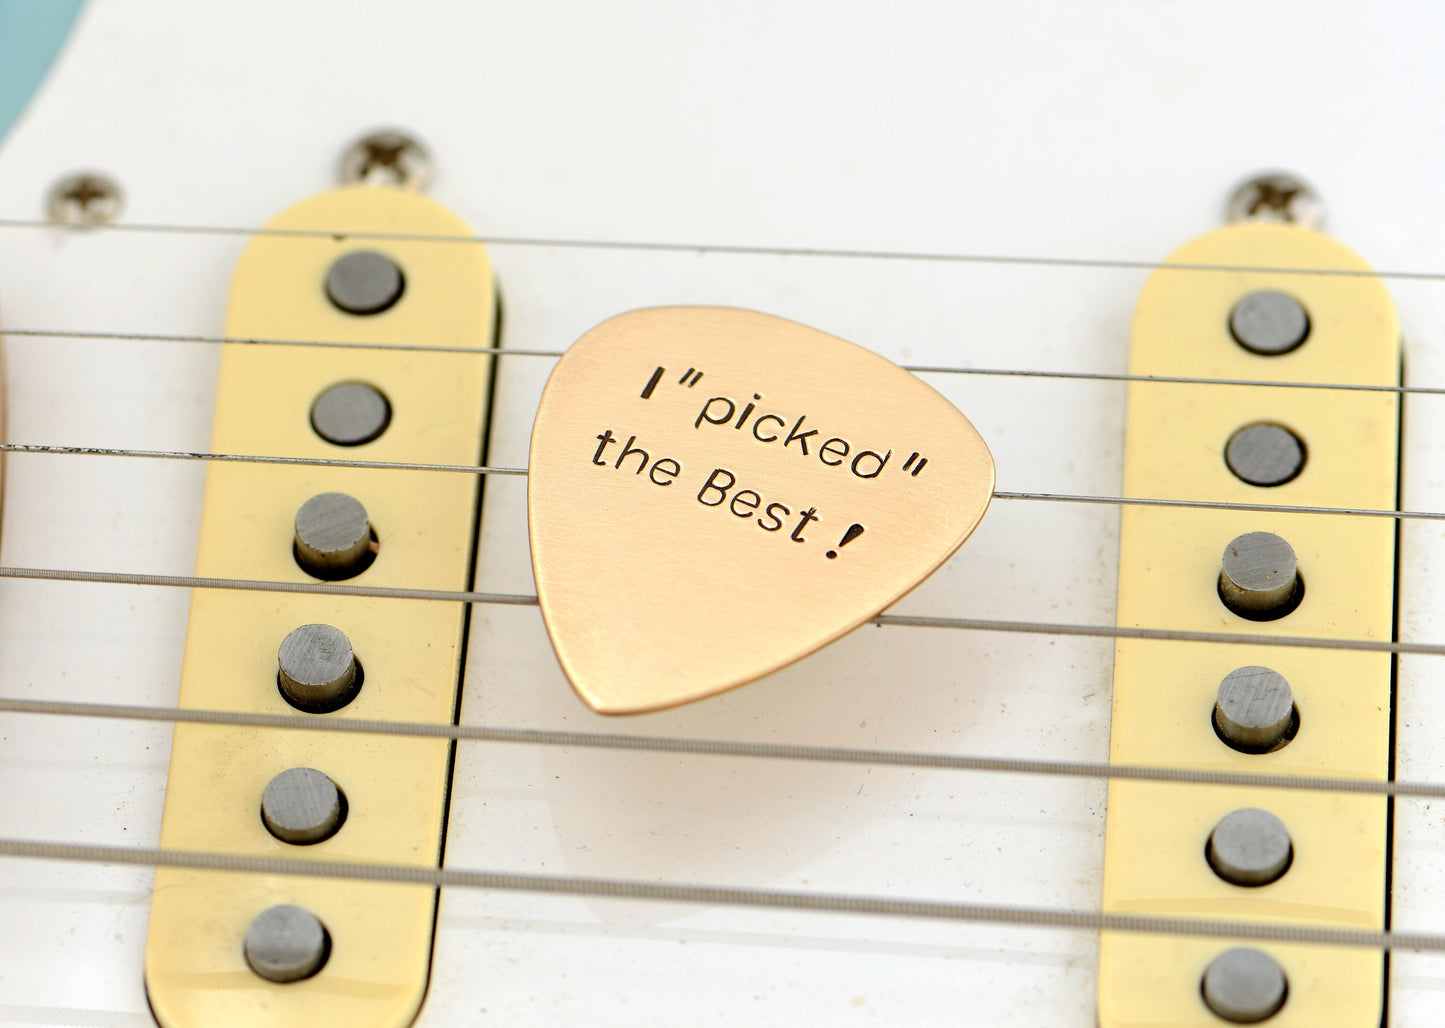 "I picked the best" guitar pick in bronze - playable